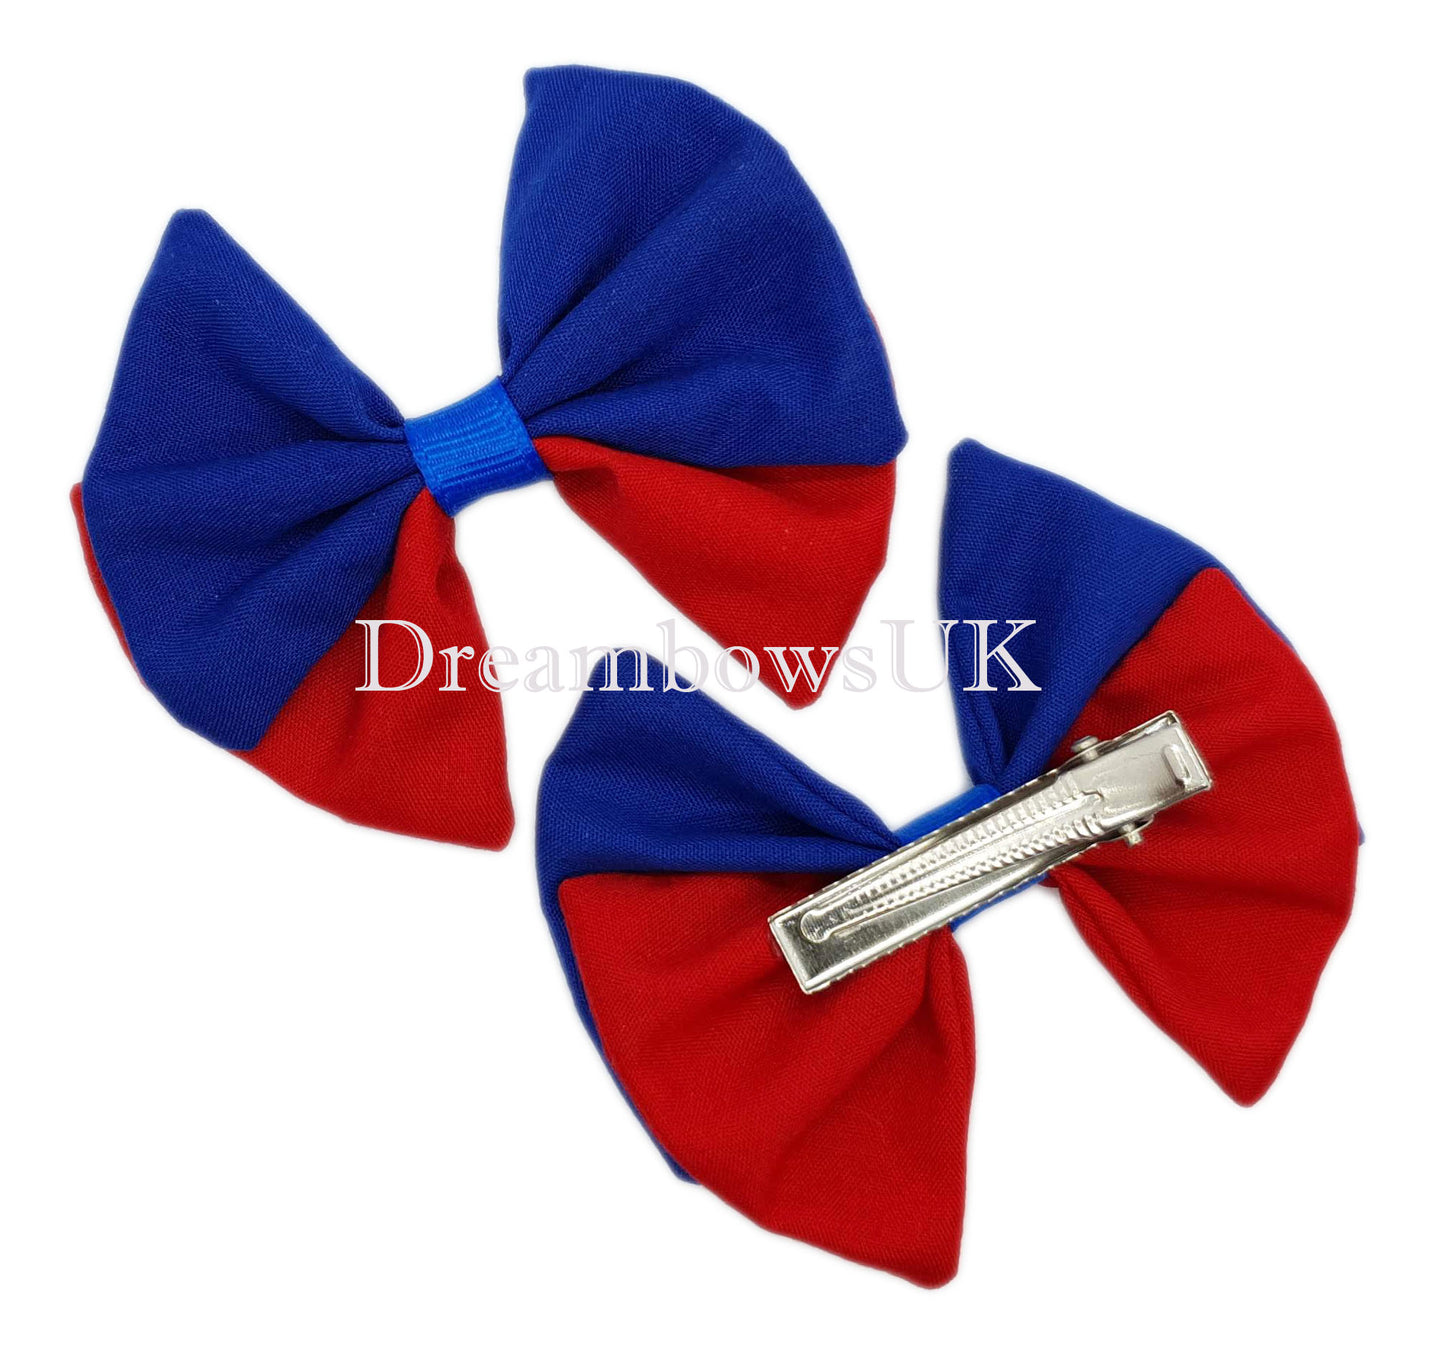 2x Royal blue and red fabric hair bows